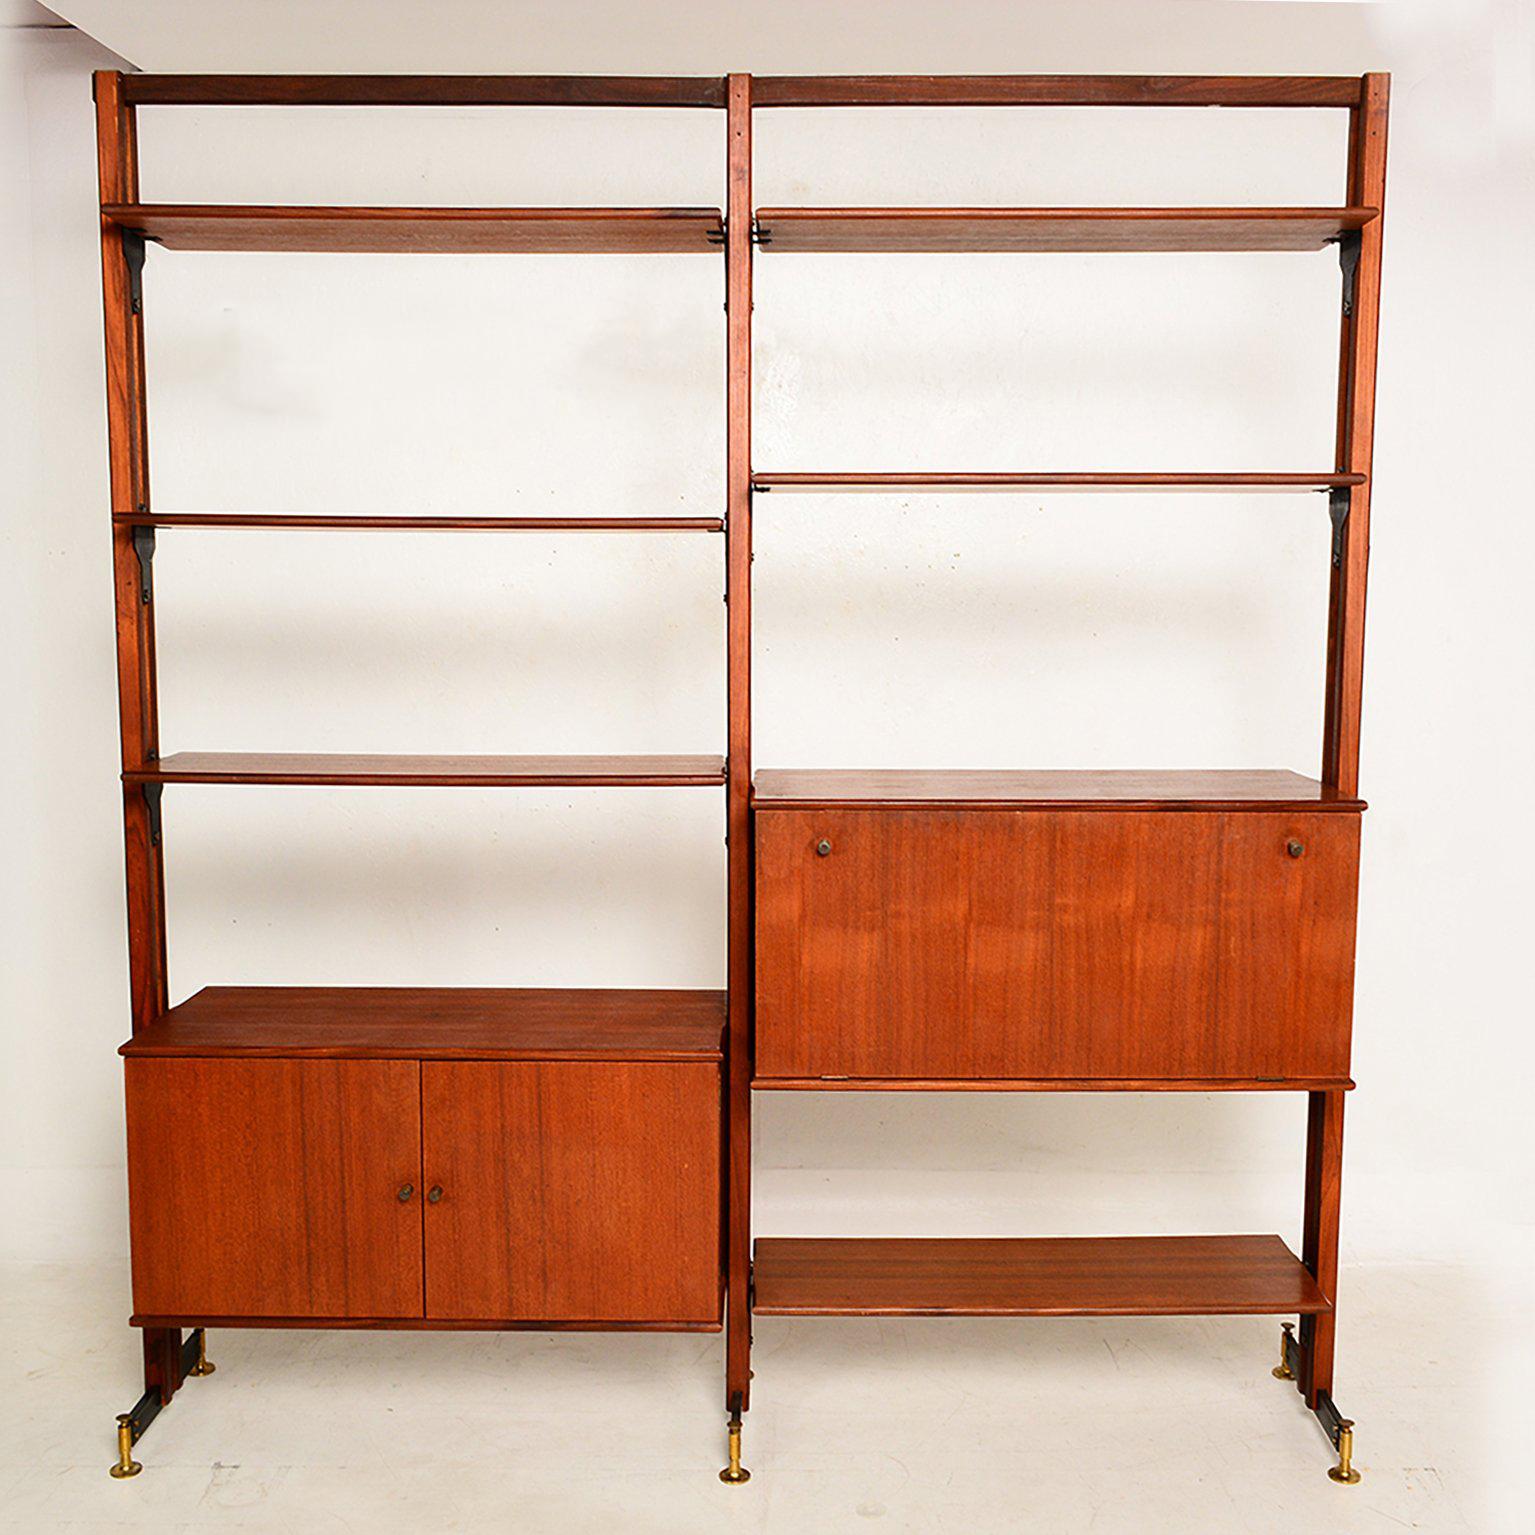 For your consideration a two bay freestanding wall unit, which can serve as room divider. 

Beautiful wood grain unsure of what king of wood. The system has bronze legs in sculptural shape.

Features several shelves and two cabinets. 

Please